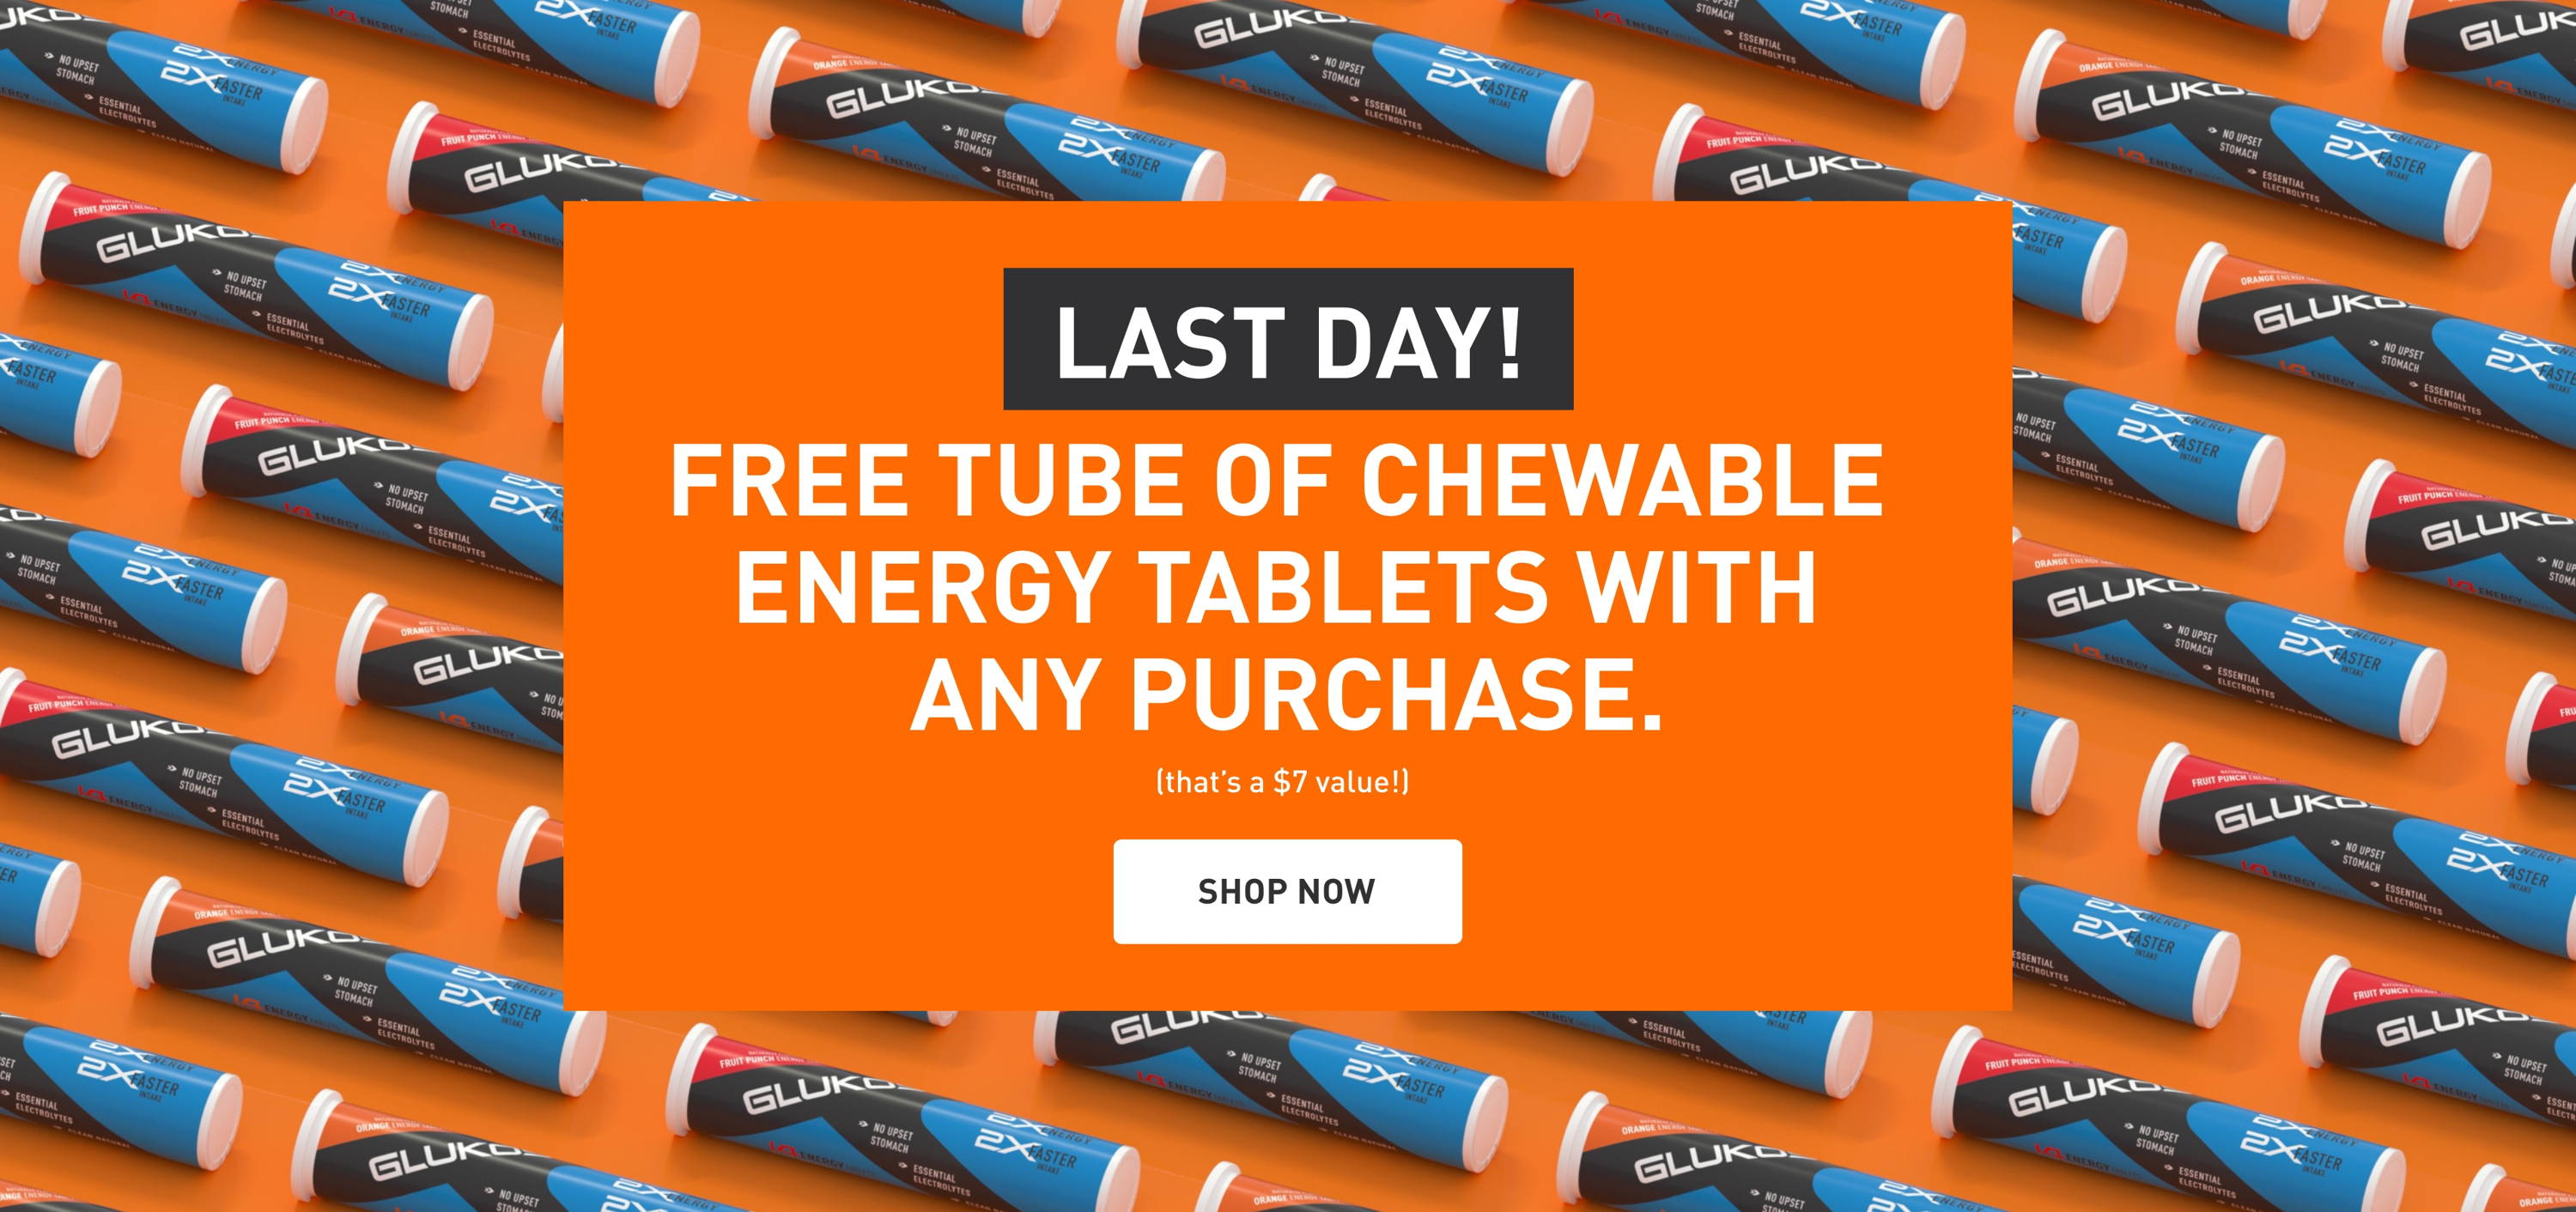 Last Day! Free tube of chewable energy tablets with any purchase. (that's a $7 value!) SHOP NOW